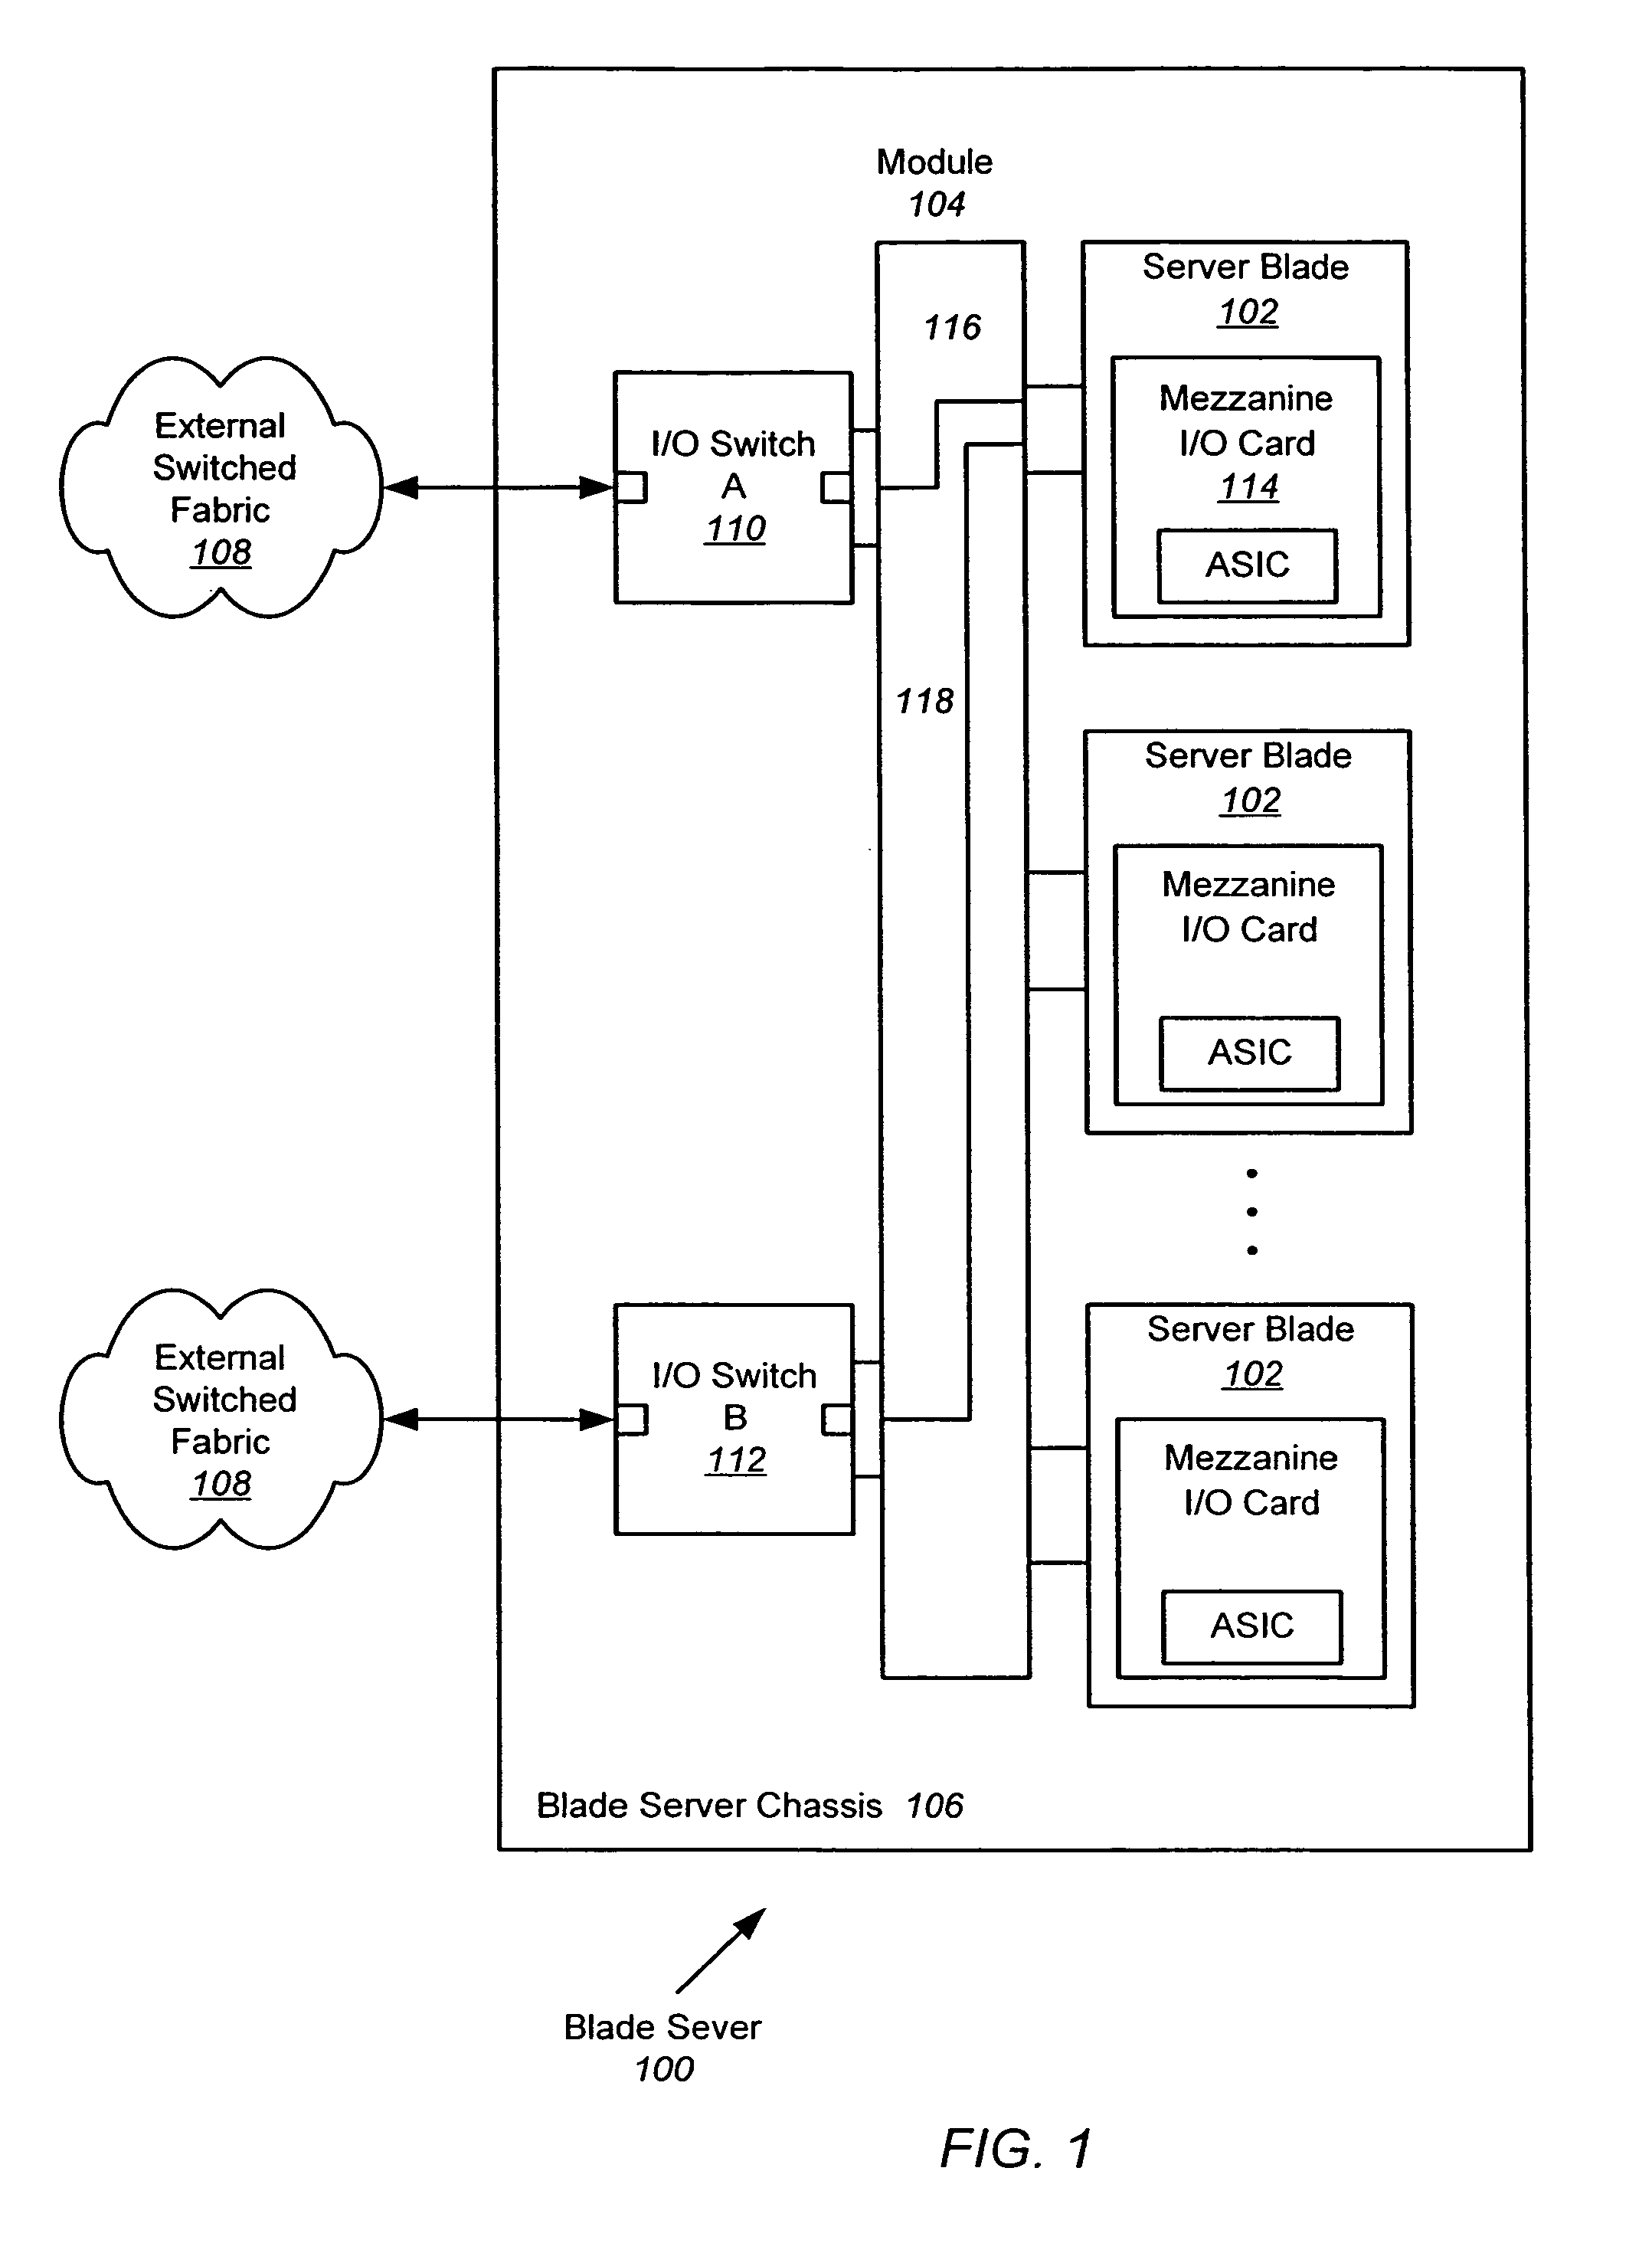 Data path differentiator for pre-emphasis requirement determination or slot identification